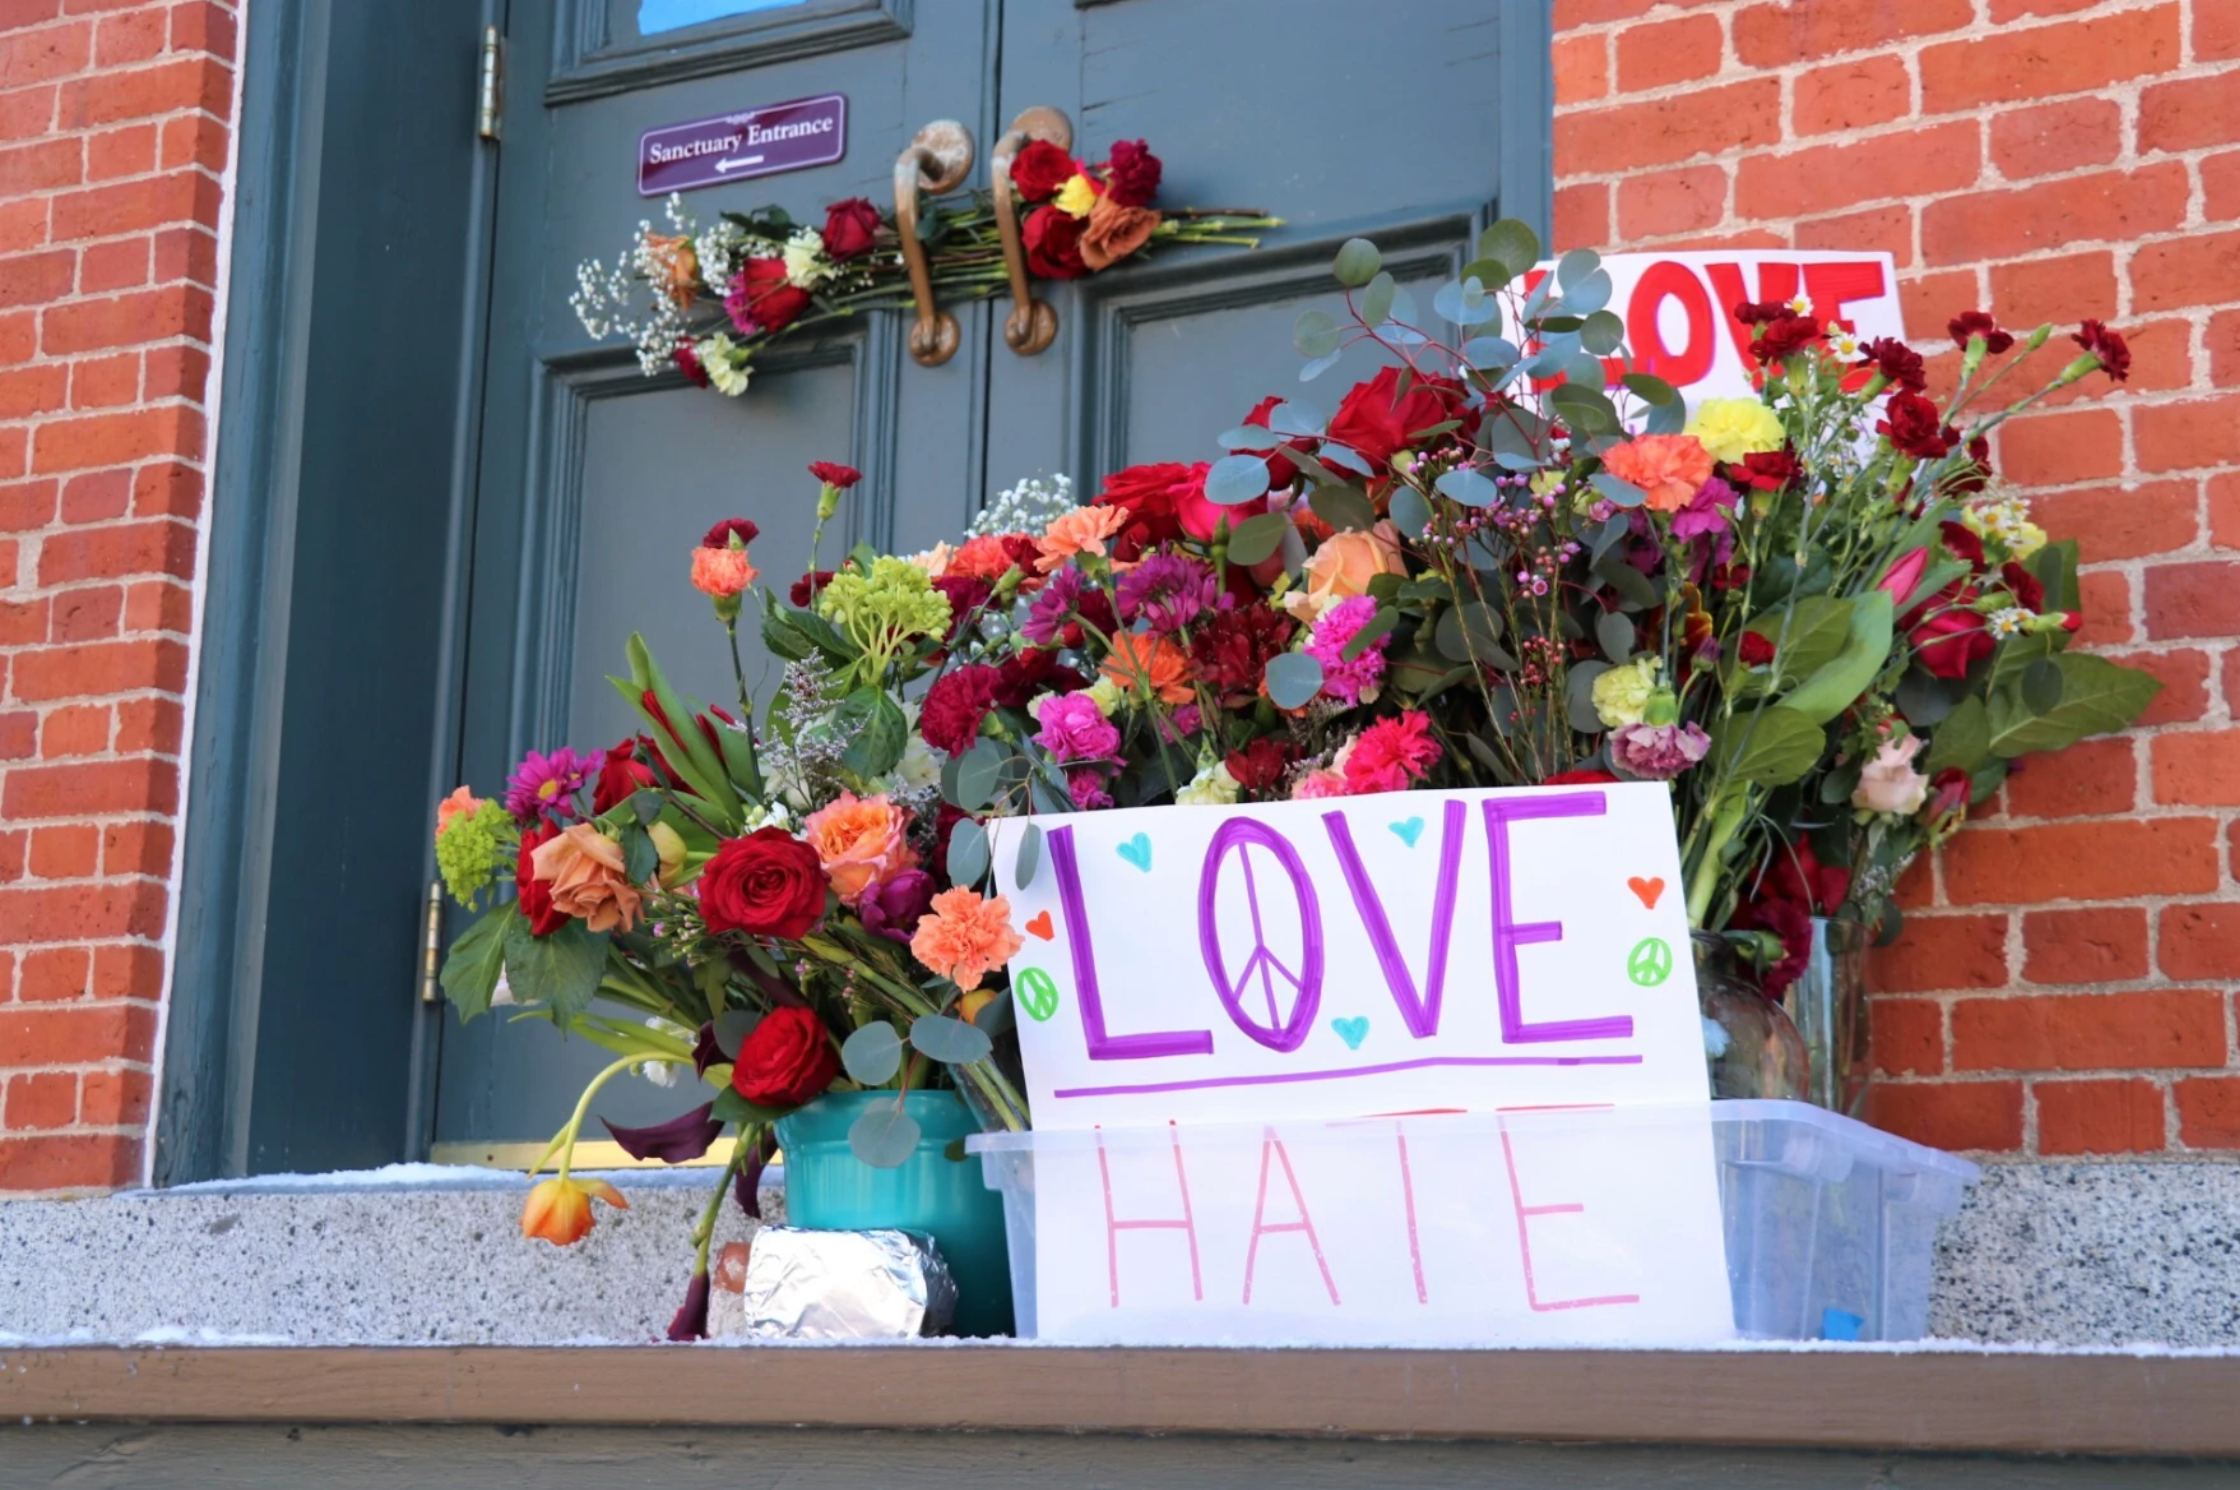 Following a spate of vandalism, Portsmouth organized 'Love Blooms Here,' an event where flowers were left with impacted businesses and Temple Israel. (Dan Tuohy/NHPR)